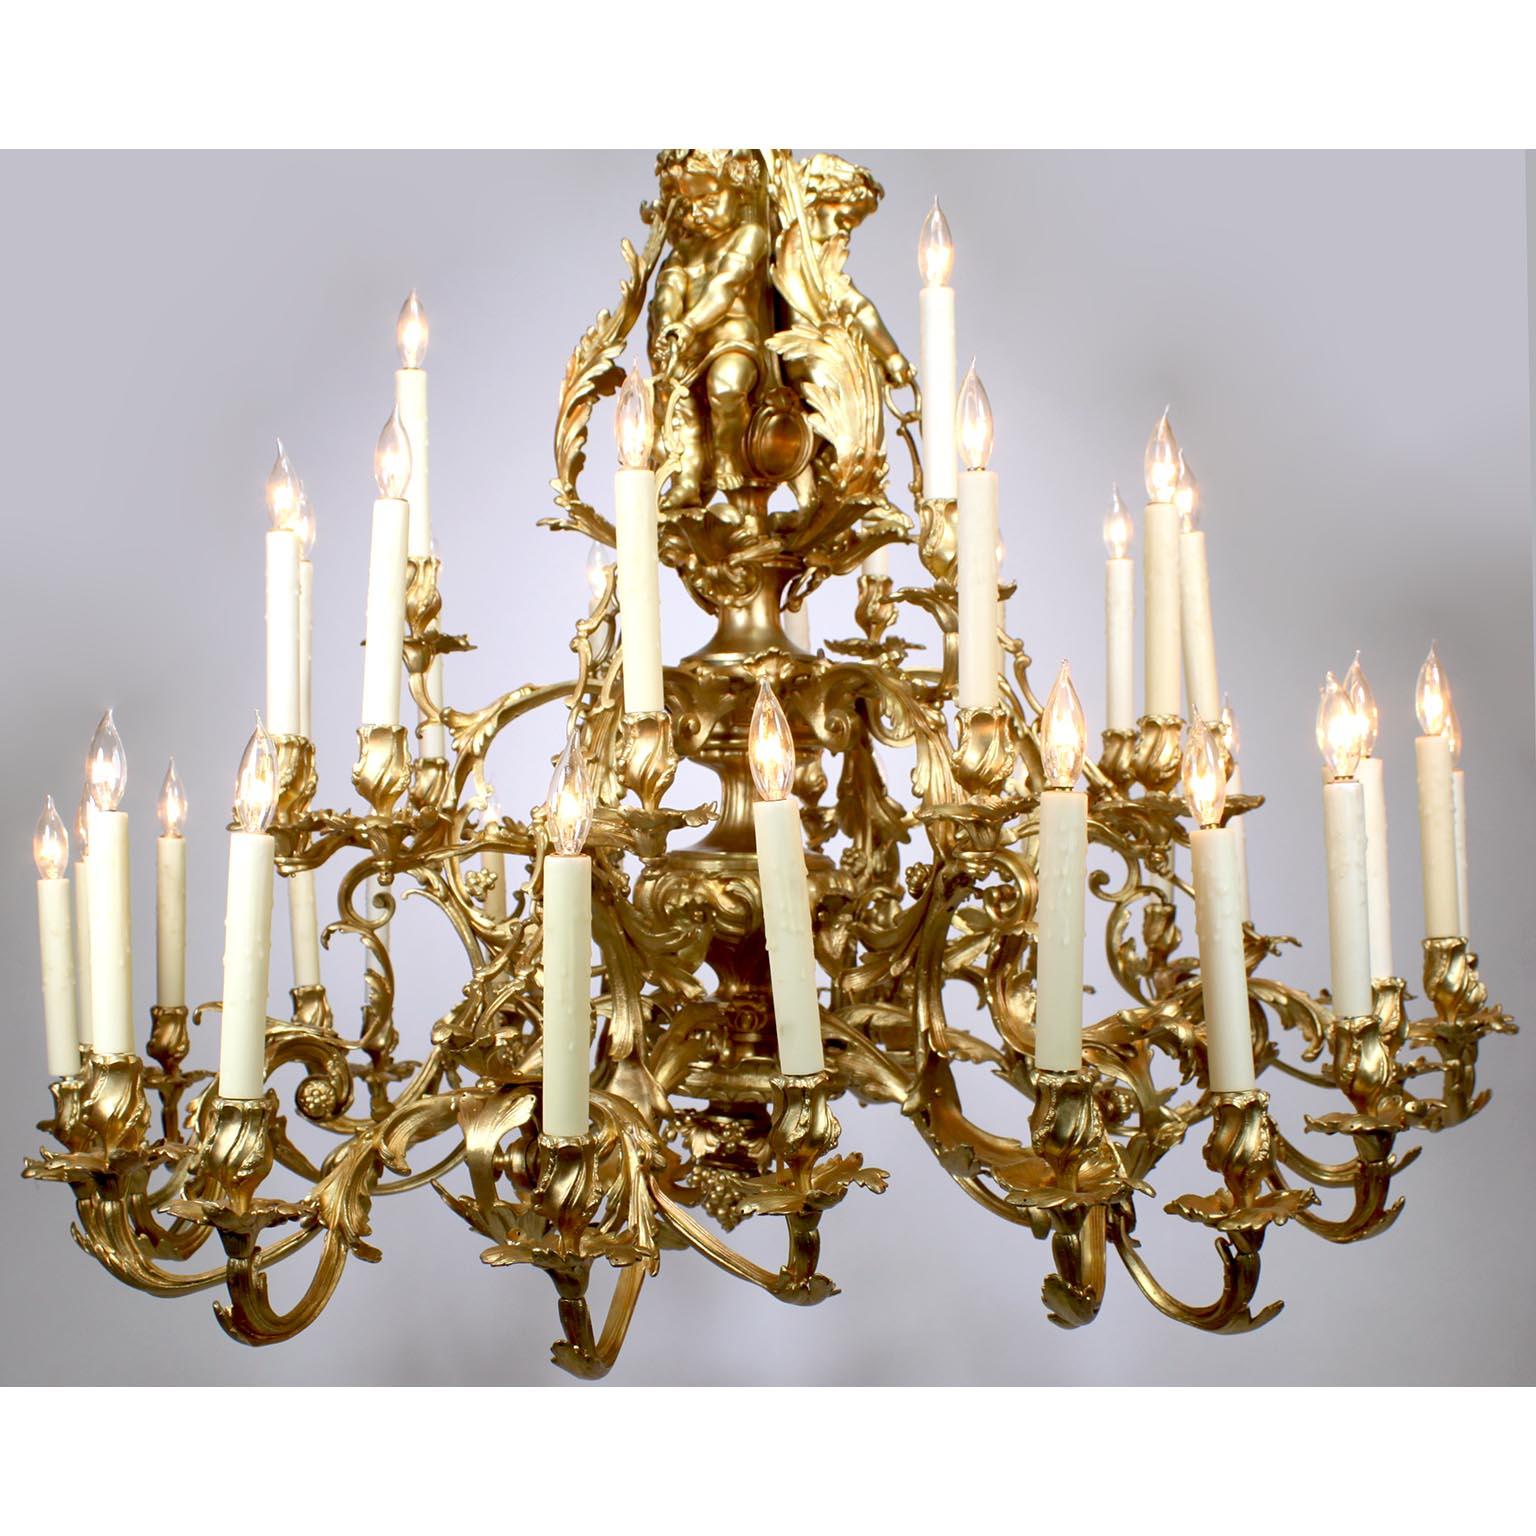 A Palatial French 19th Century Louis XV Style Gilt-Bronze Figural Thirty-Nine Light Chandelier. The scrolled arm candle-arms designed with acanthus and floral wreaths protruding from a center stem surmounted with three allegorical standing Putti